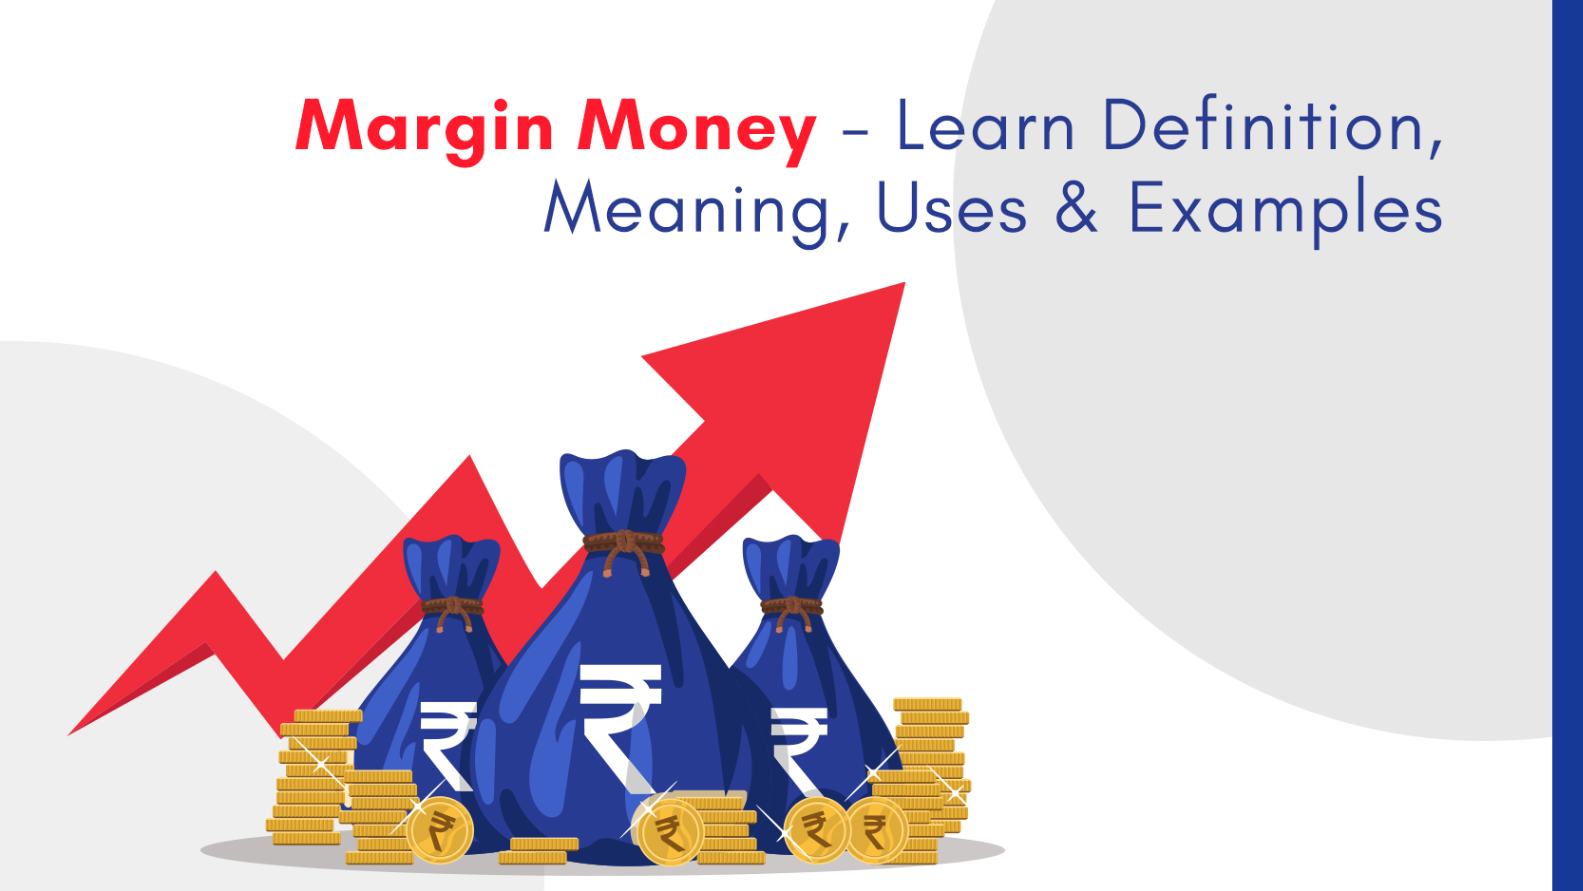 Margin Money - Learn Definition, Meaning, Uses and Examples